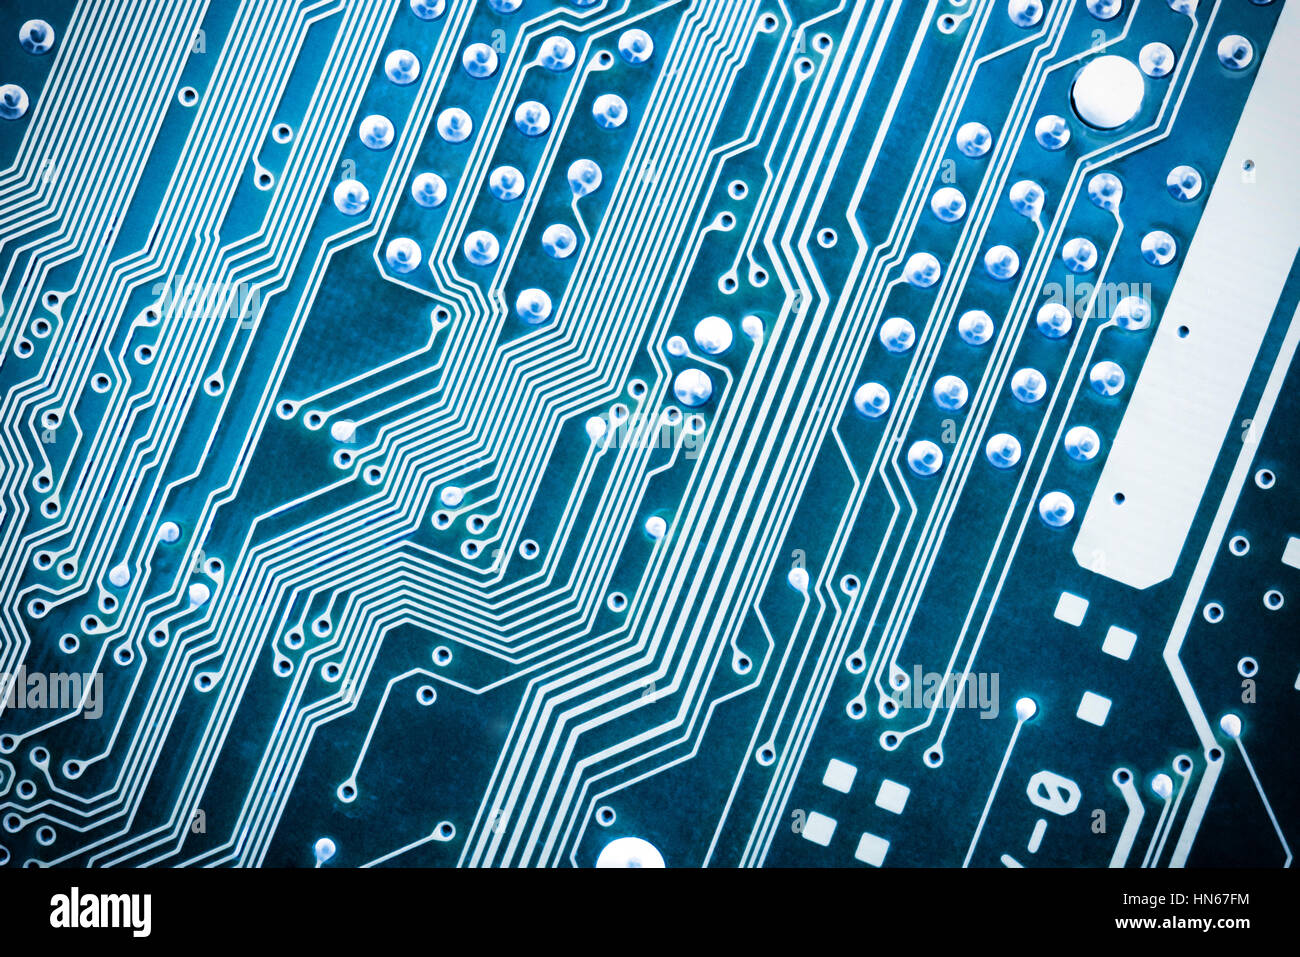 abstract background with Circuit board Stock Photo